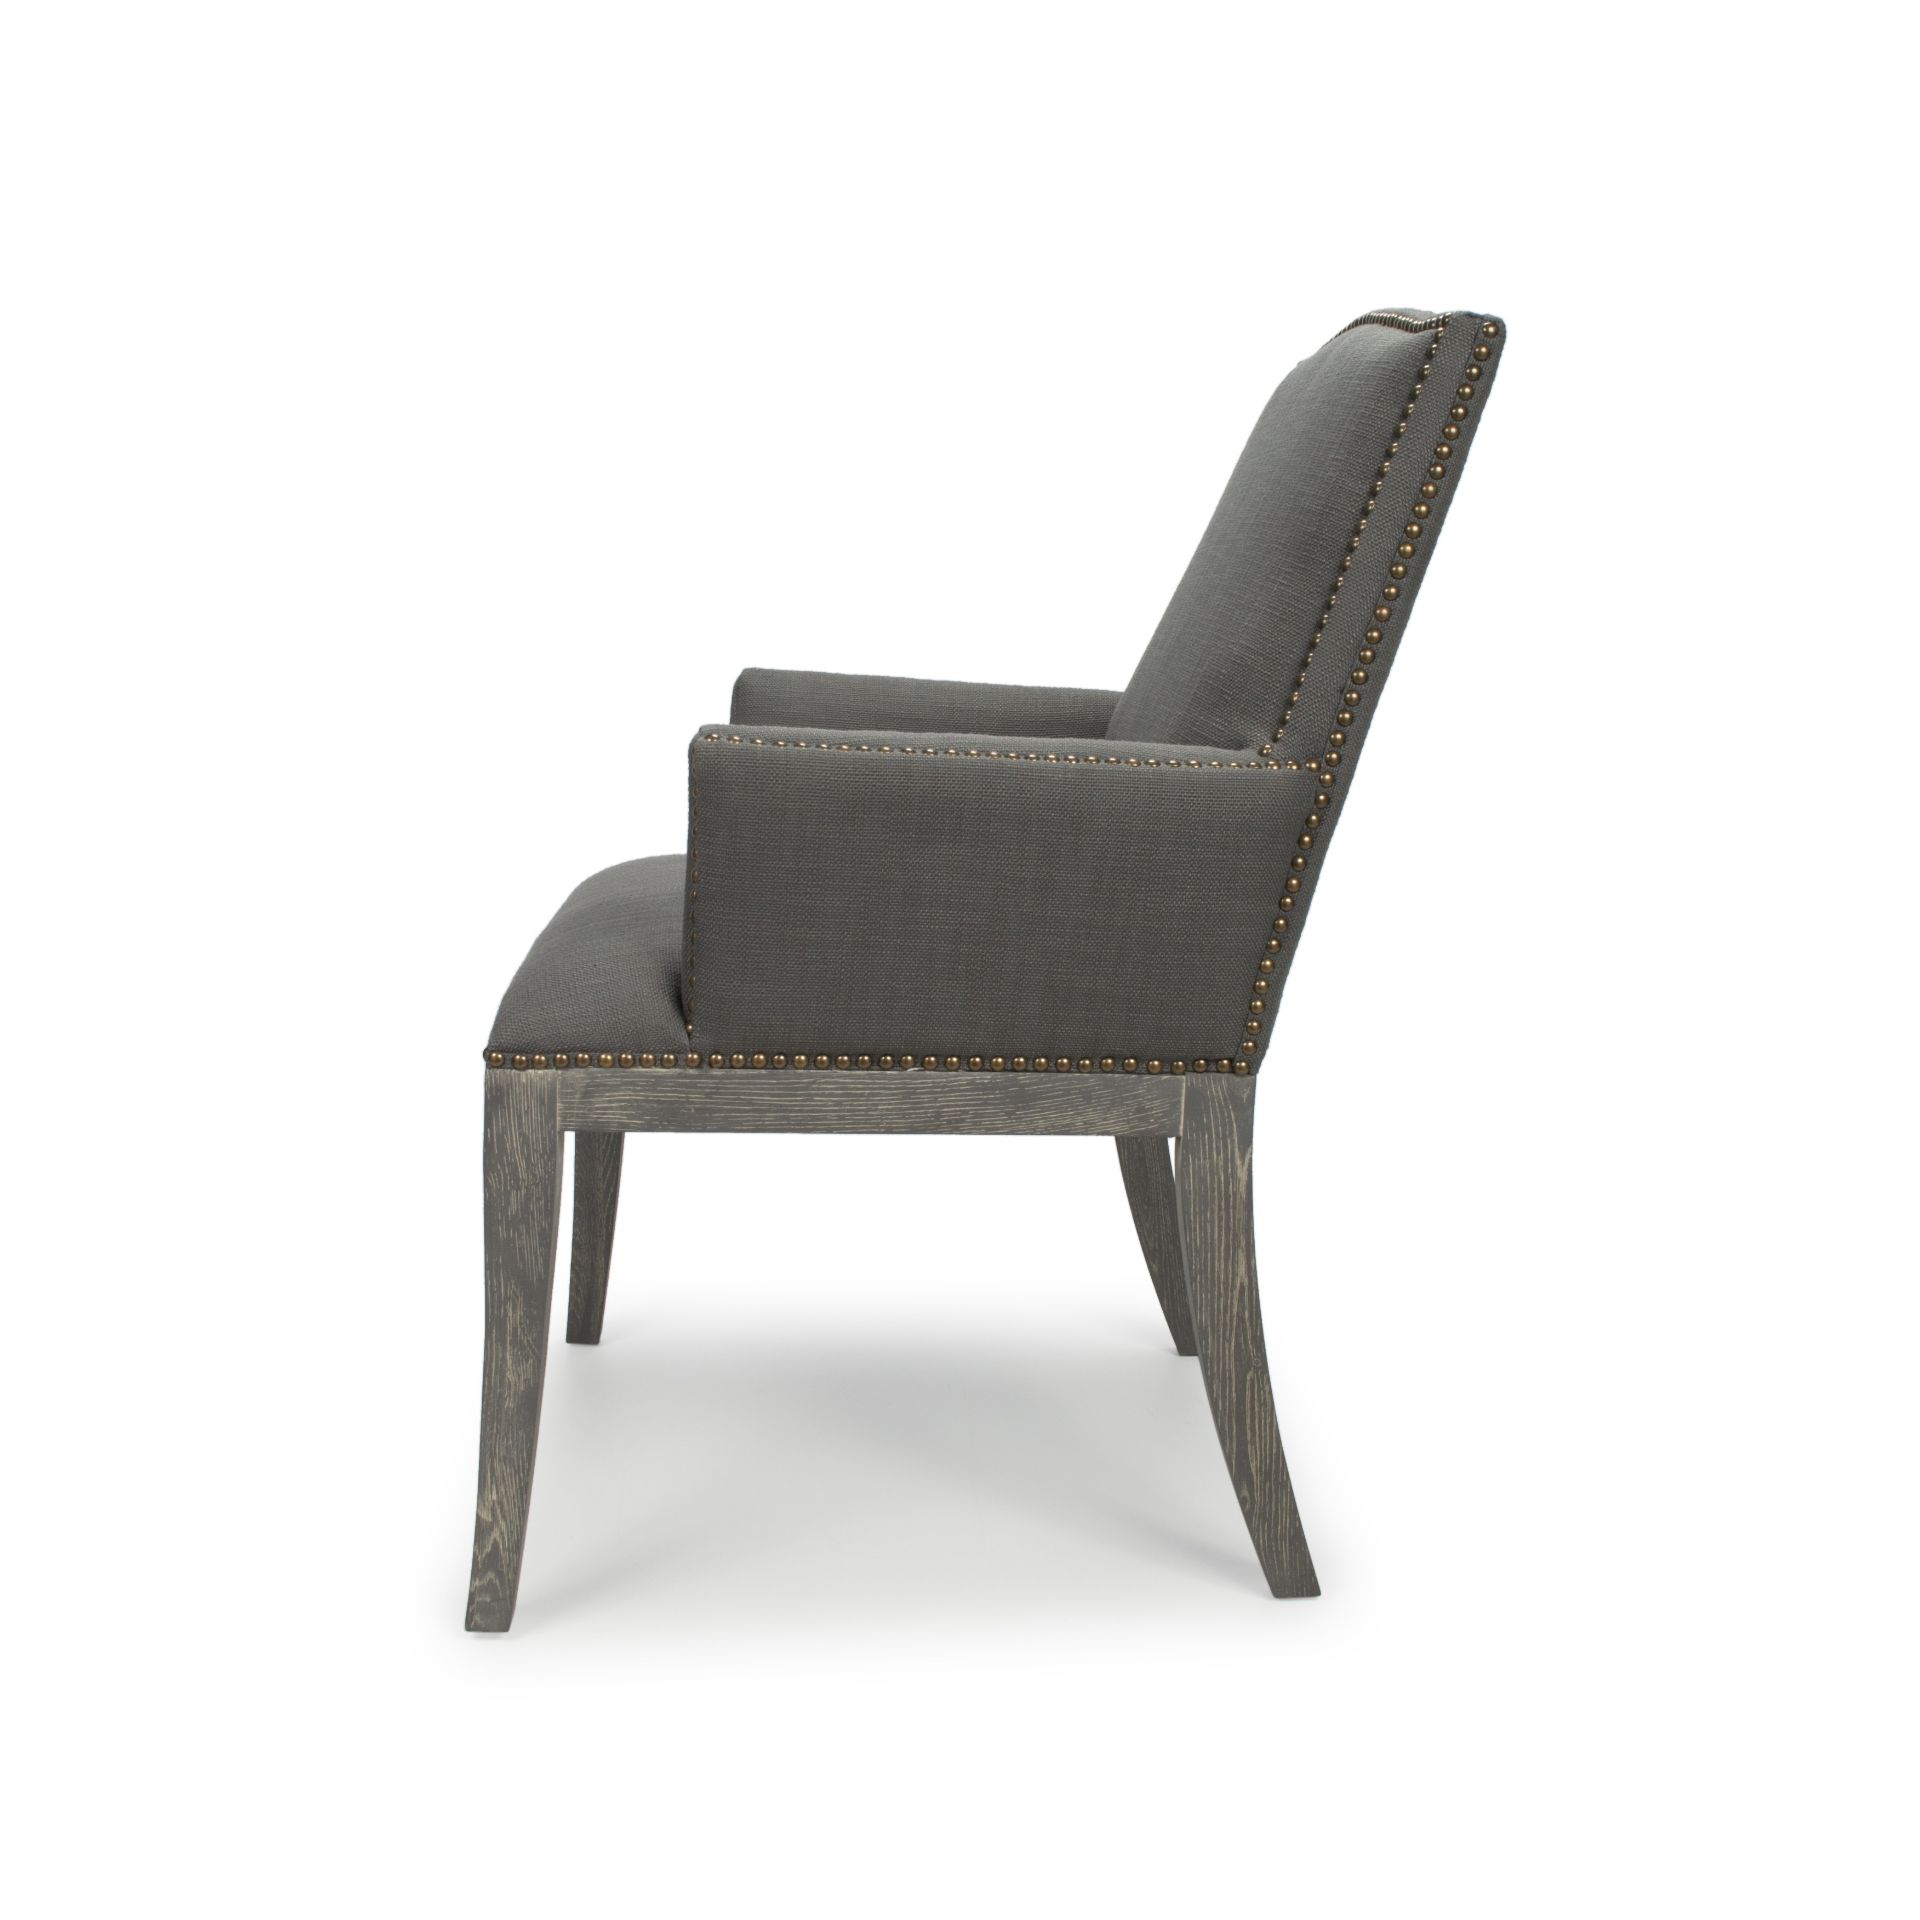 Athens Grey Linen Accent Dining Chair - Image 4 of 4